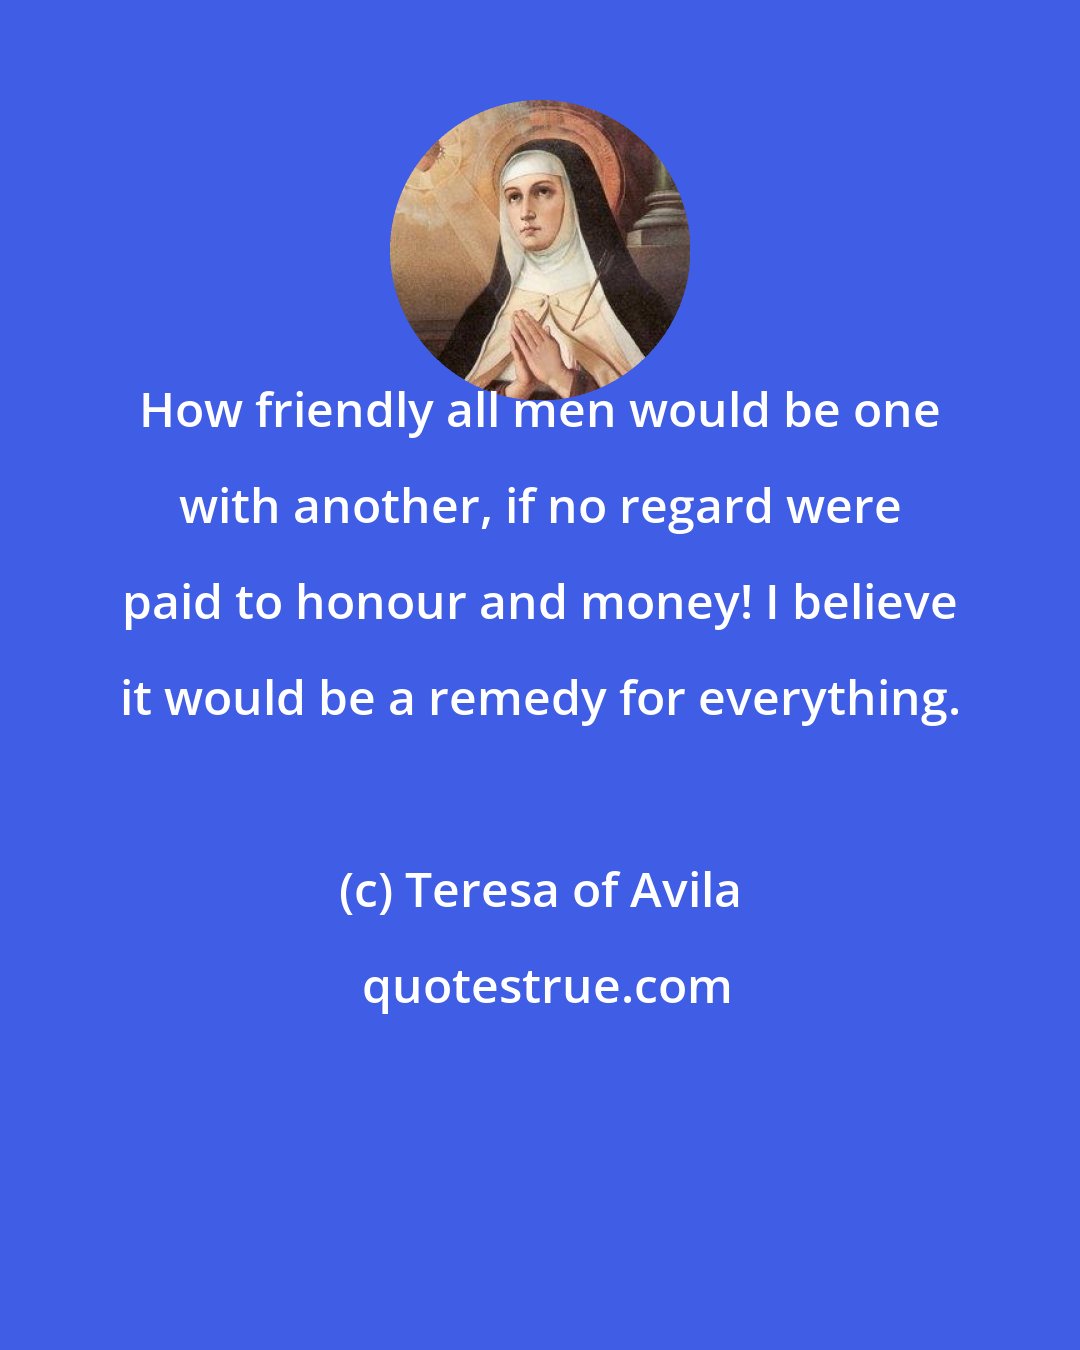 Teresa of Avila: How friendly all men would be one with another, if no regard were paid to honour and money! I believe it would be a remedy for everything.